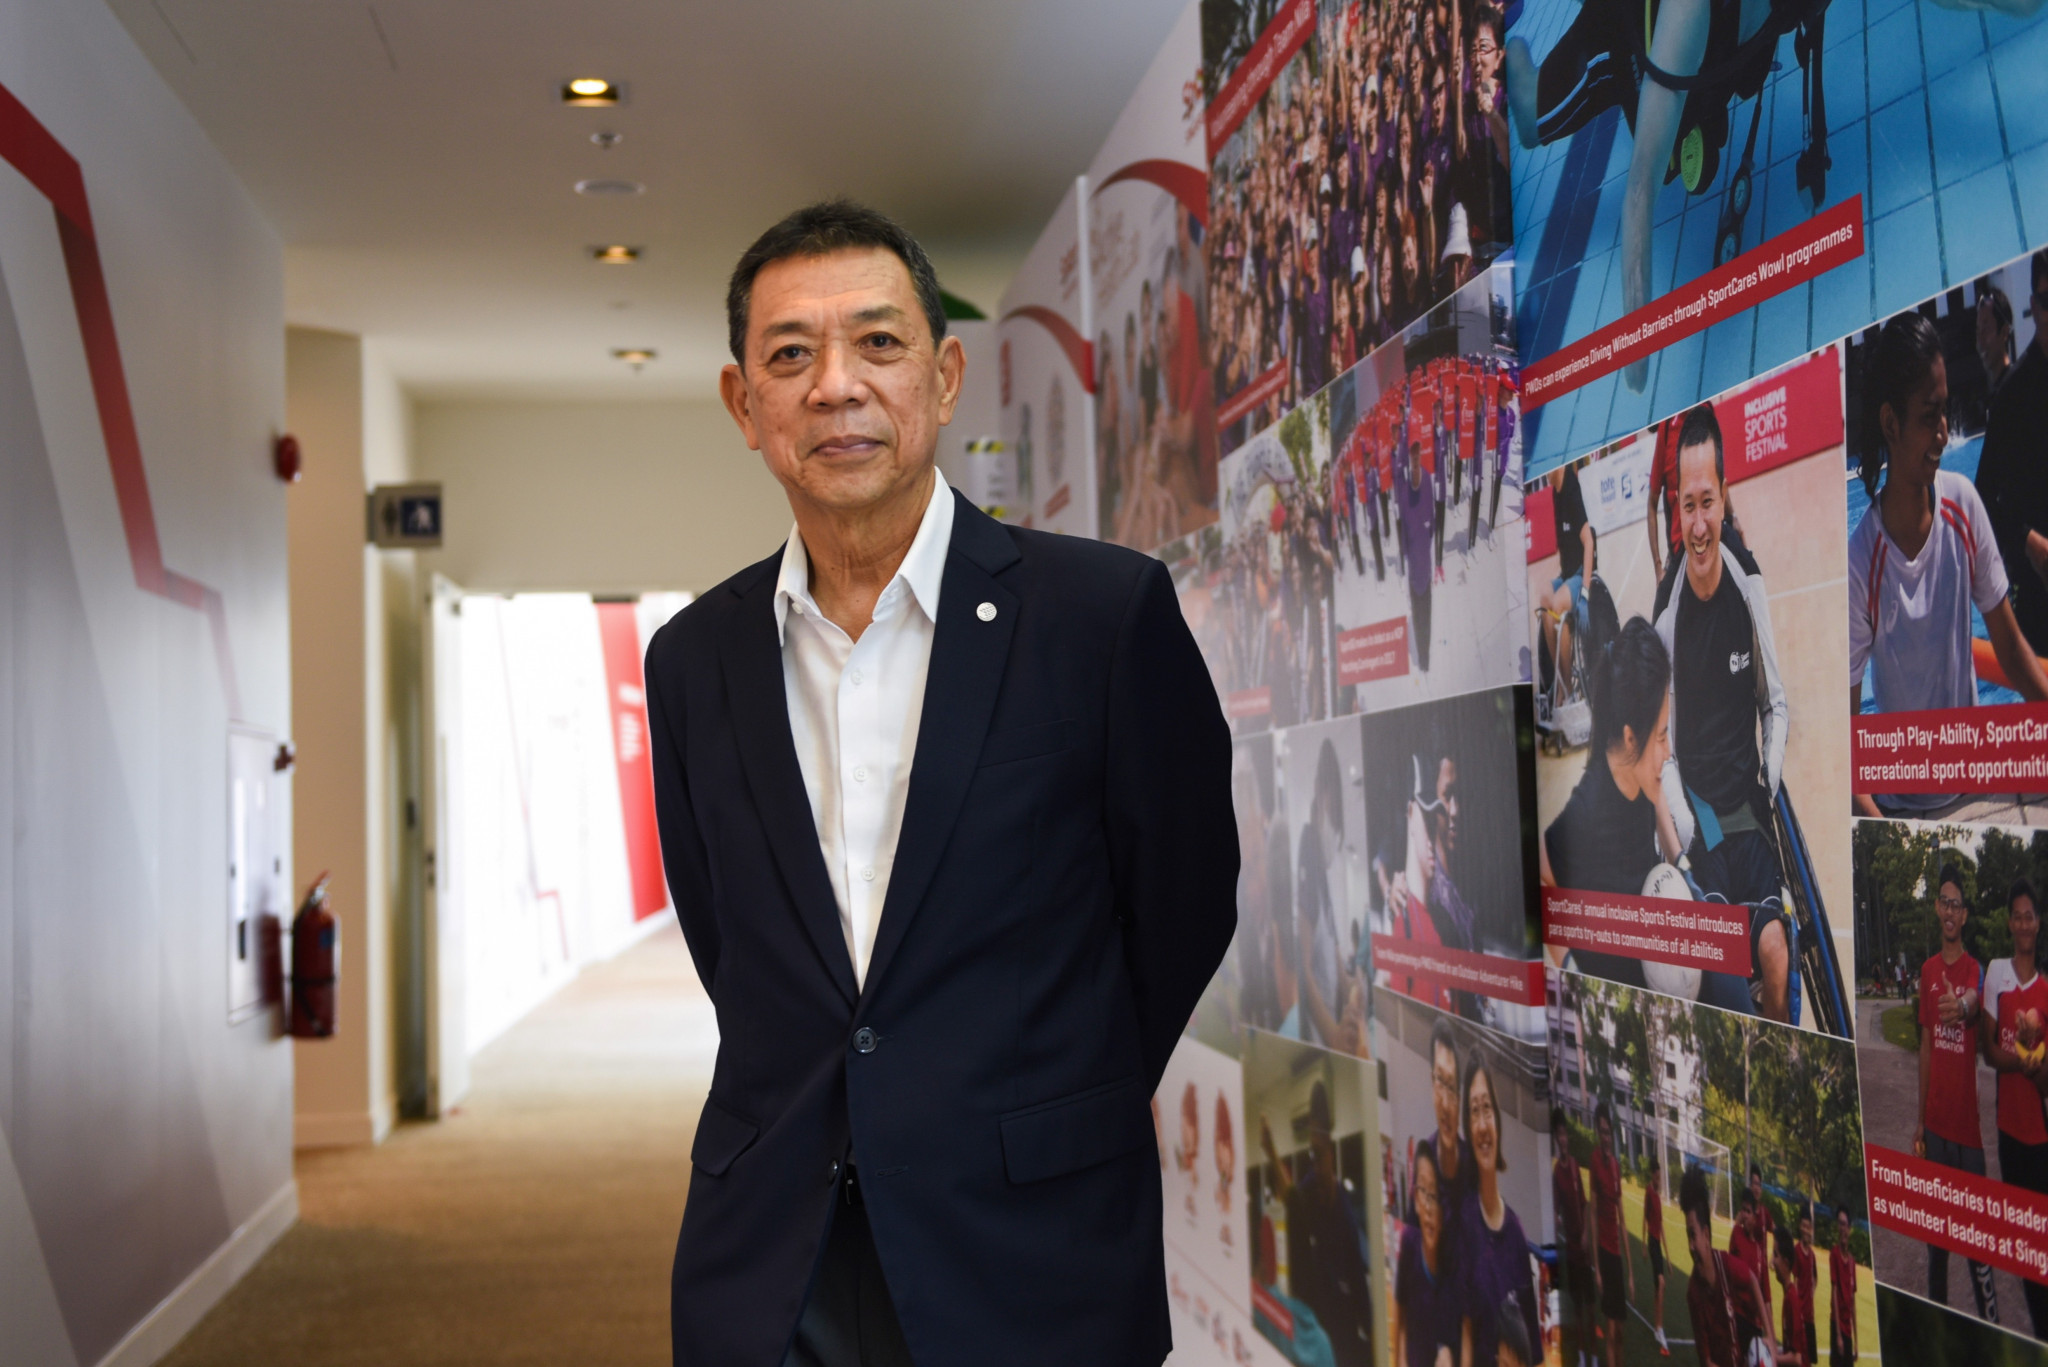 GEF President Chan heaps praise on anniversary event for "drawing the world’s esports community together"